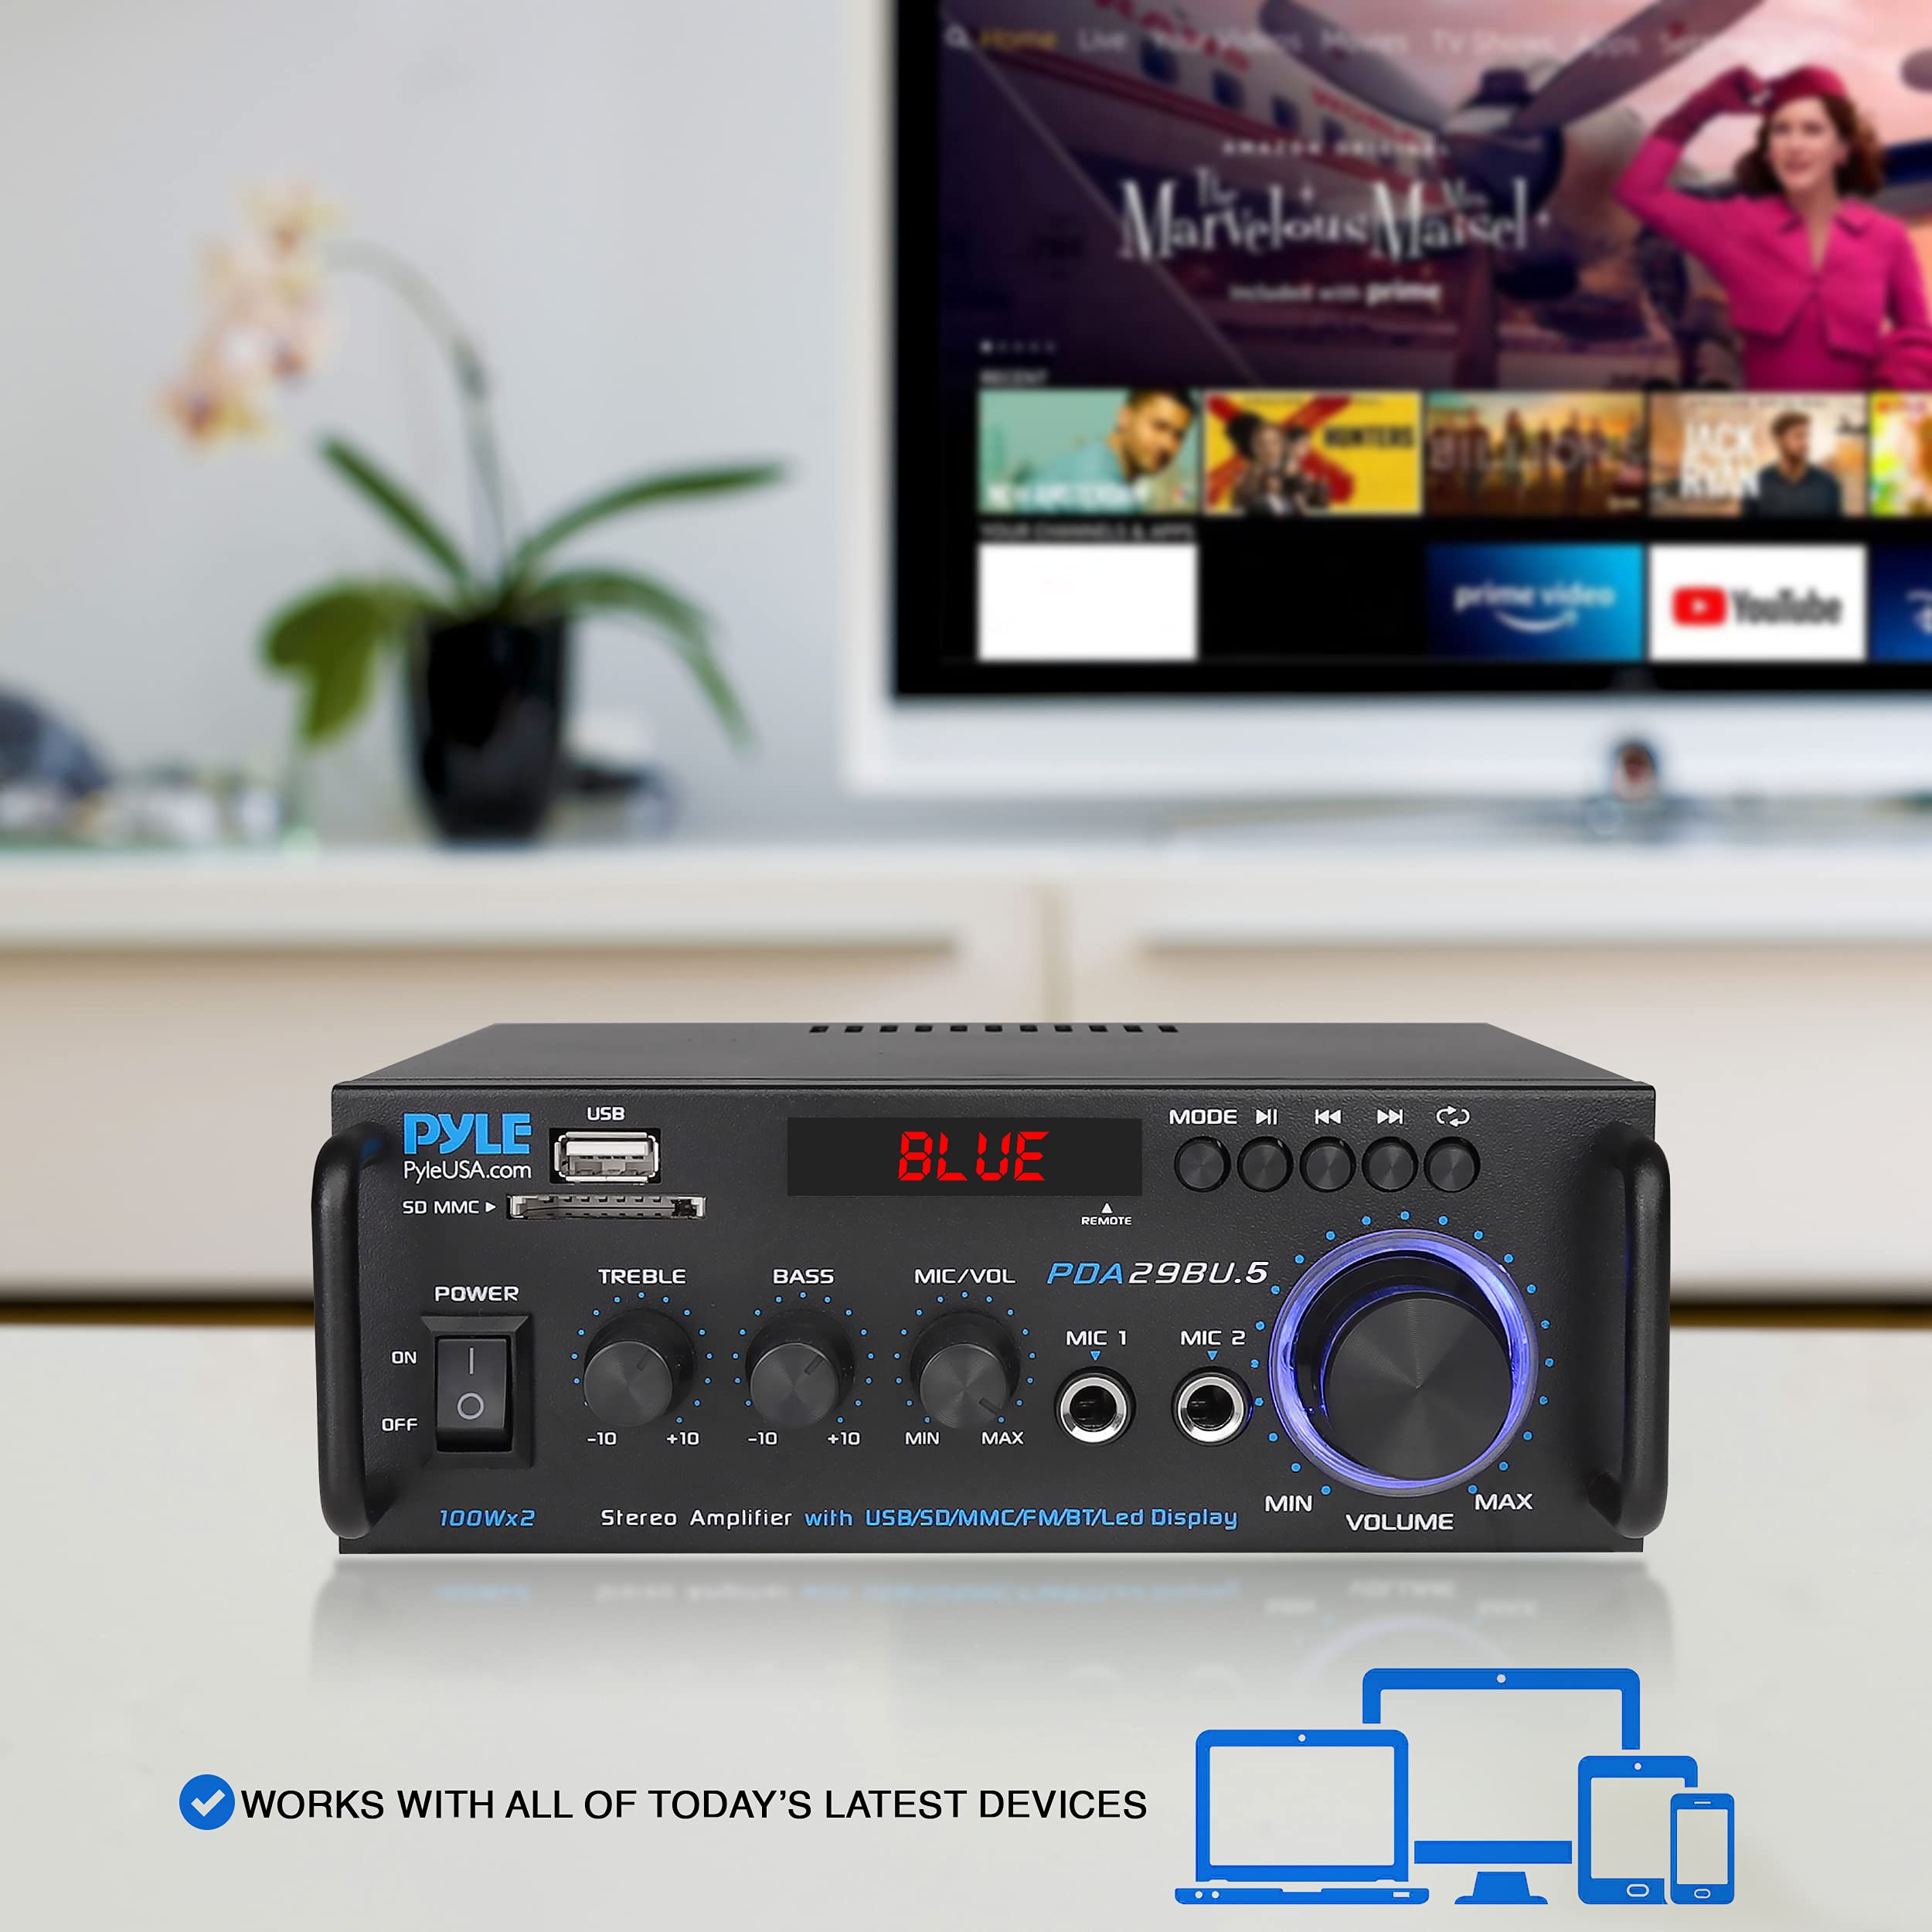 Pyle Wireless Bluetooth Stereo Power Amplifier - 200W 2 Channel Audio Stereo Receiver USA Warranty w/ RCA, USB, SD, MIC IN, FM Radio, For Home Theater Entertainment via RCA, Studio Use -Pyle PDA29BU.6